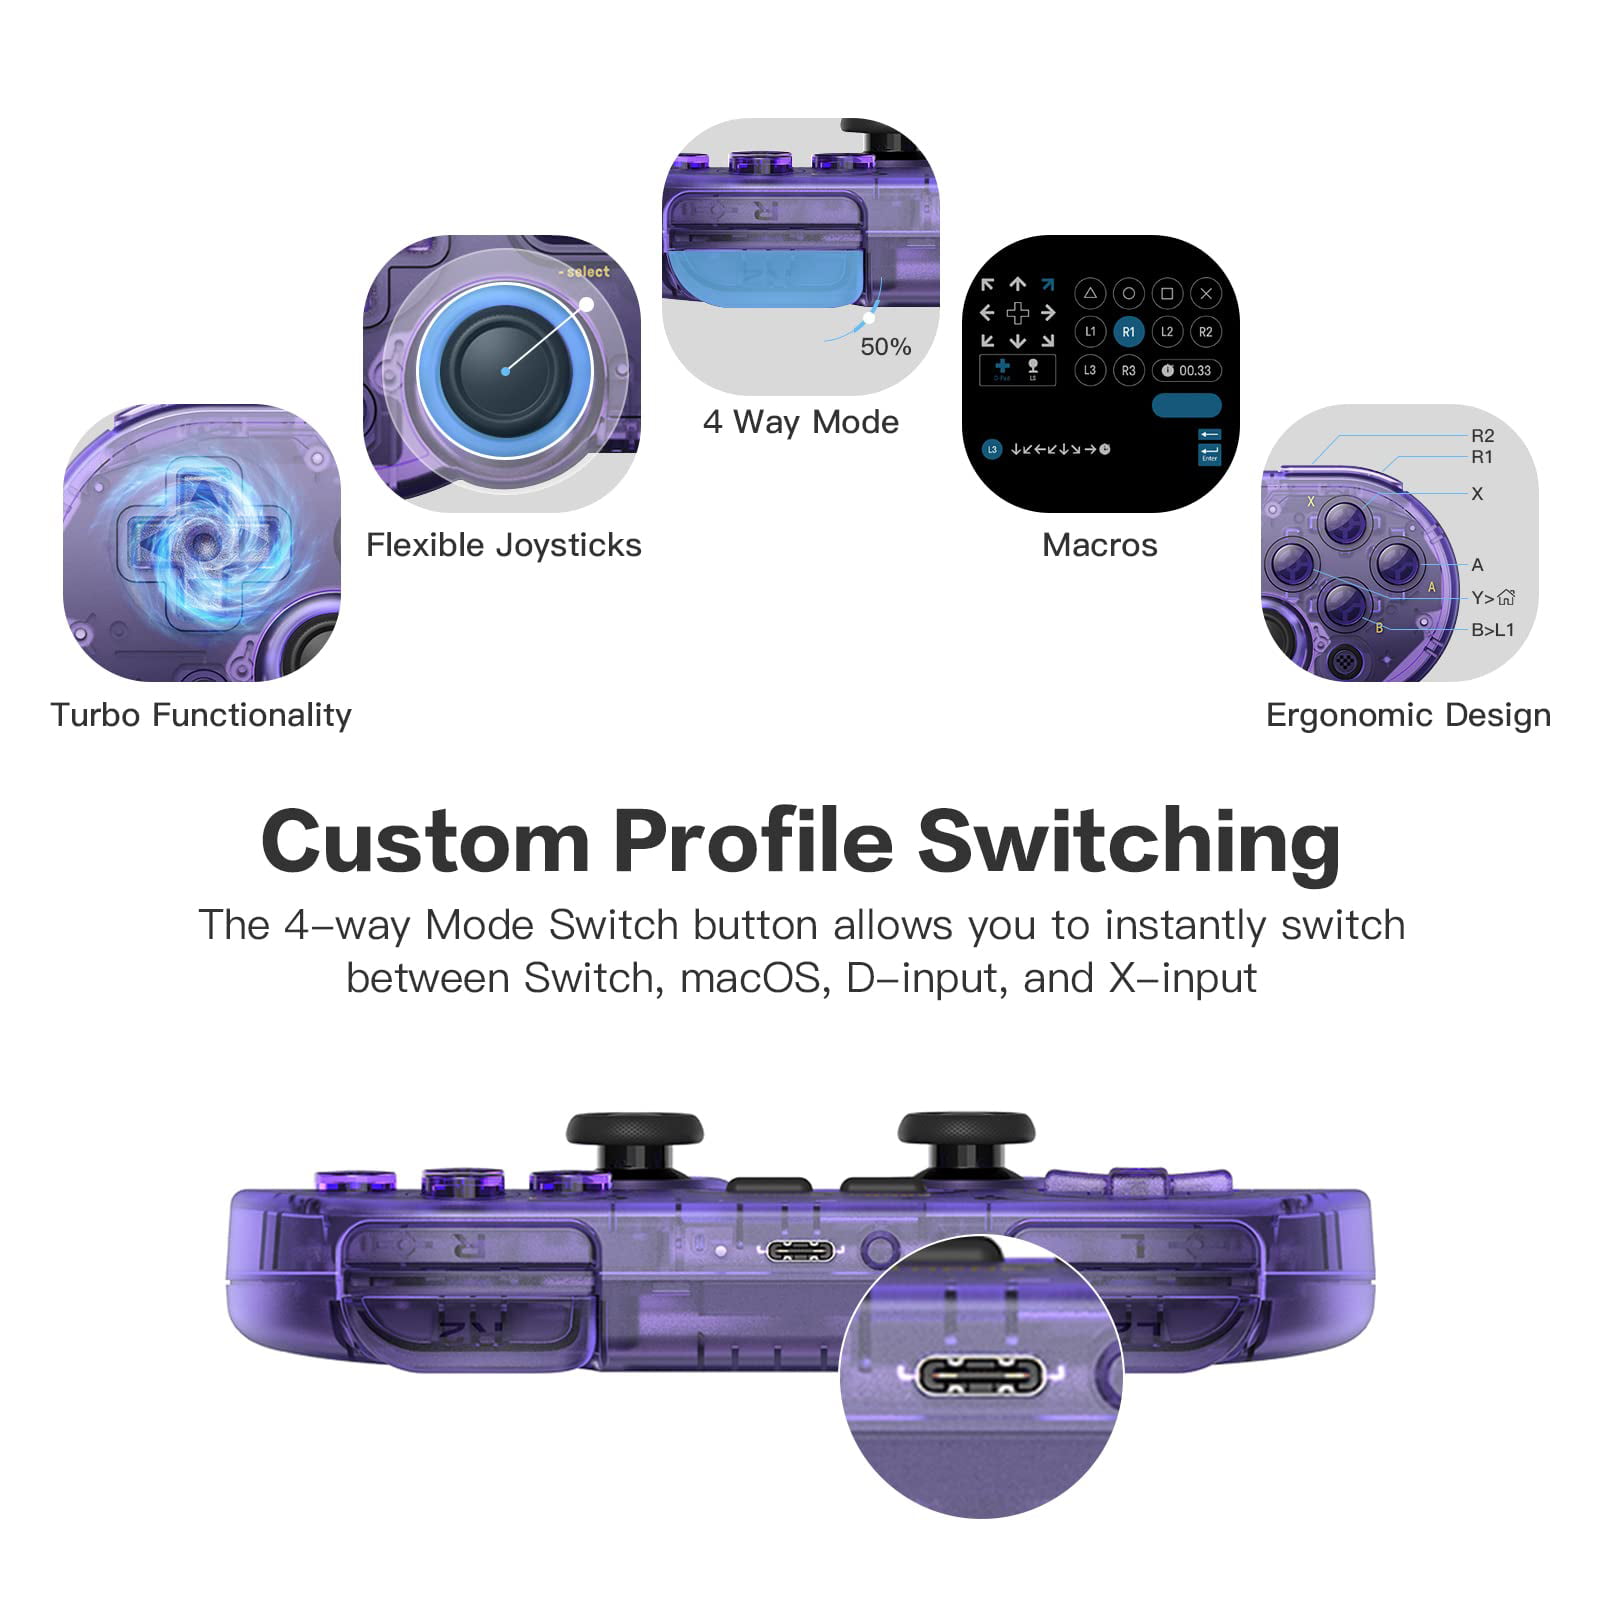 8BitDo Sn30 Pro Bluetooth Controller for Switch/Switch OLED, PC, macOS,  Android, Steam Deck & Raspberry Pi (G Classic Edition)